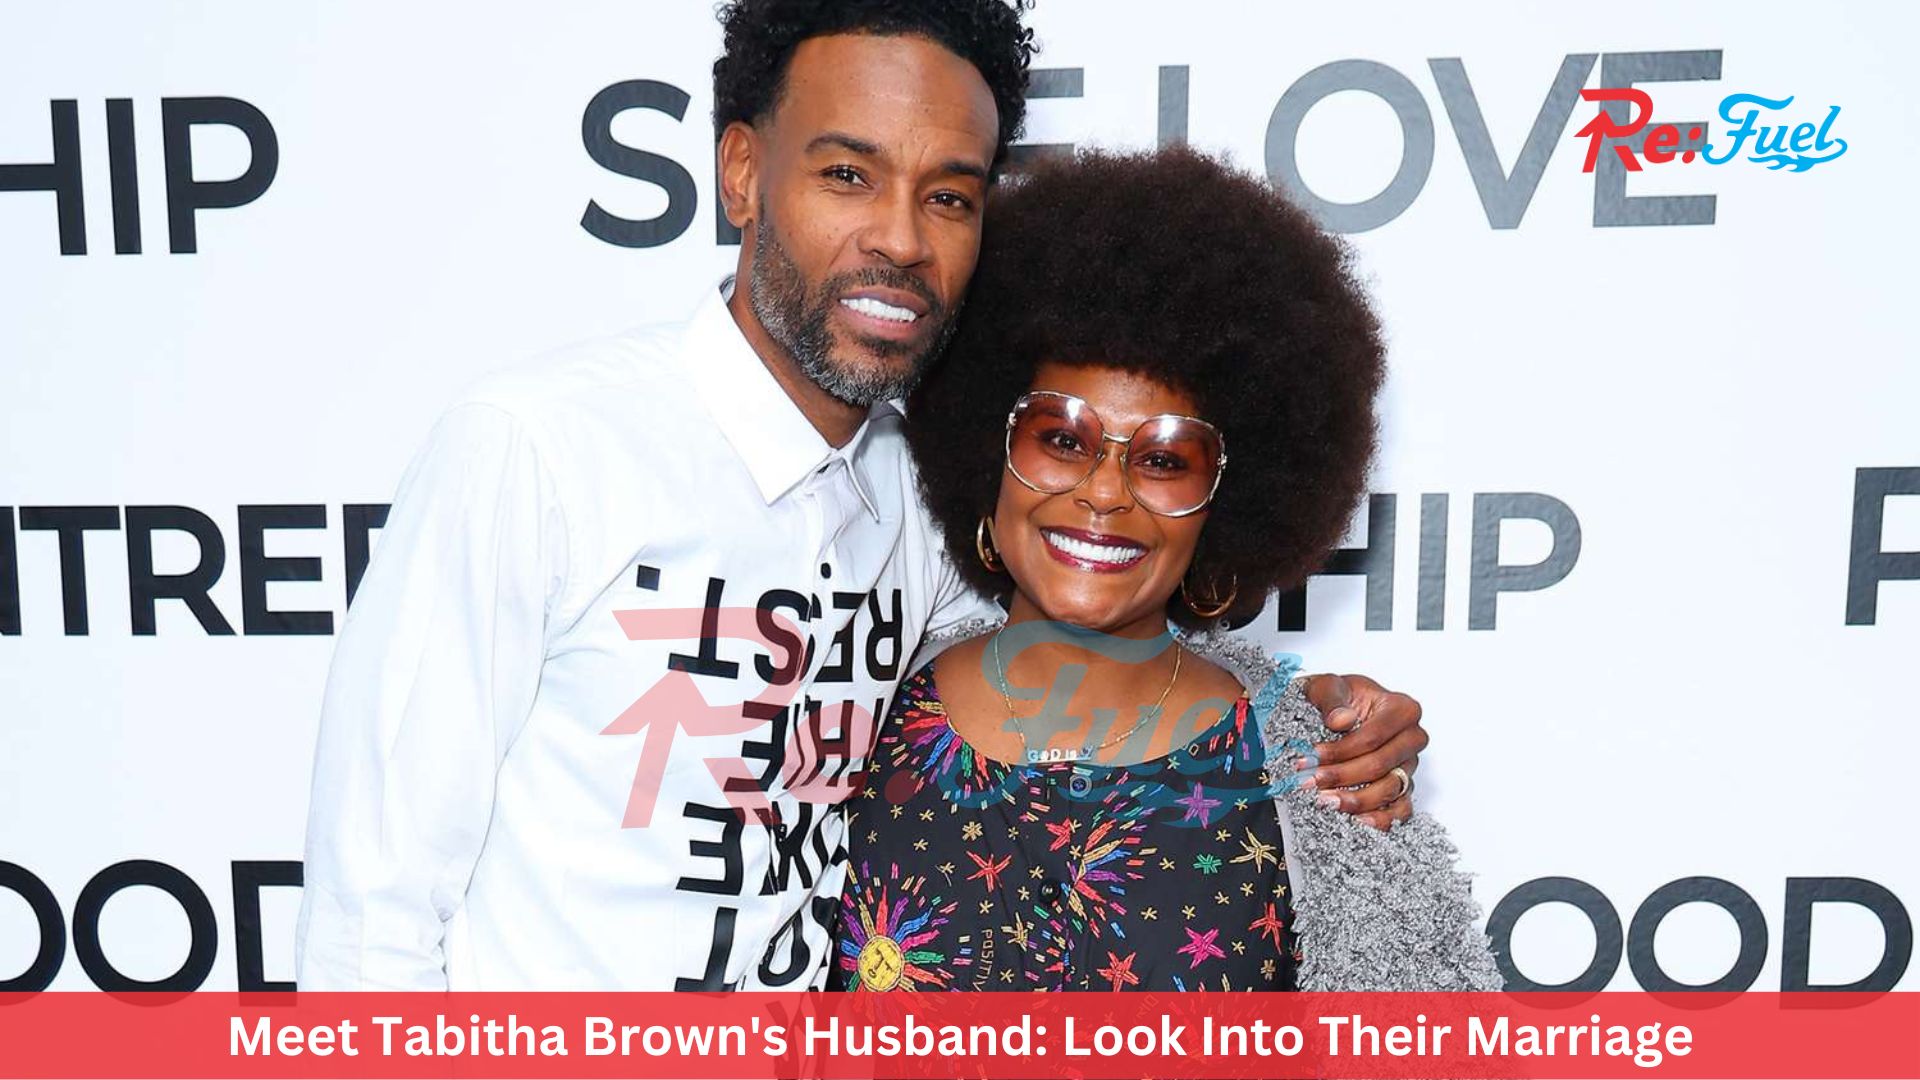 Meet Tabitha Brown's Husband: Look Into Their Marriage